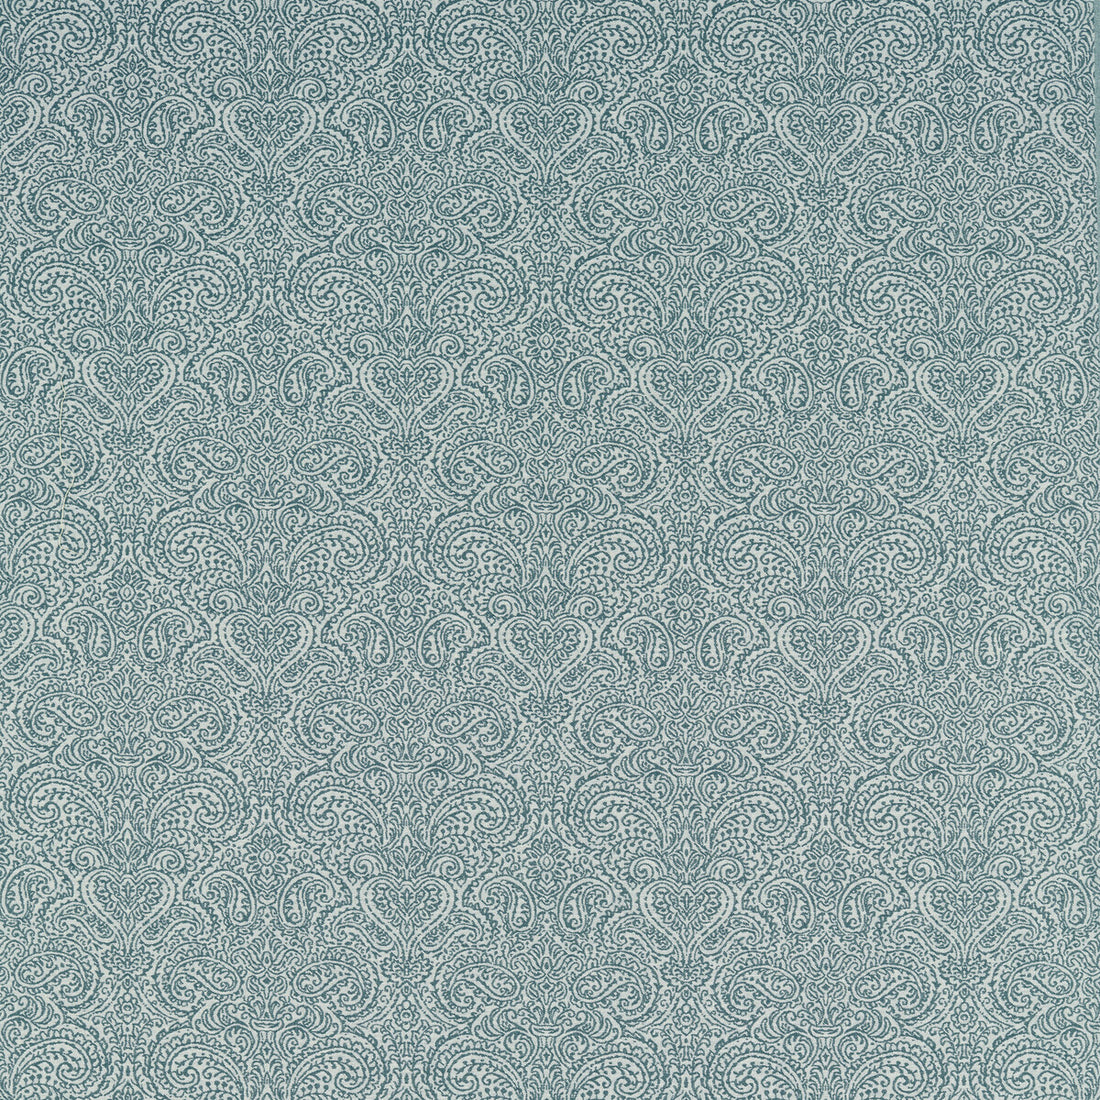 Ada fabric in teal color - pattern F1540/06.CAC.0 - by Clarke And Clarke in the Clarke &amp; Clarke Vintage collection